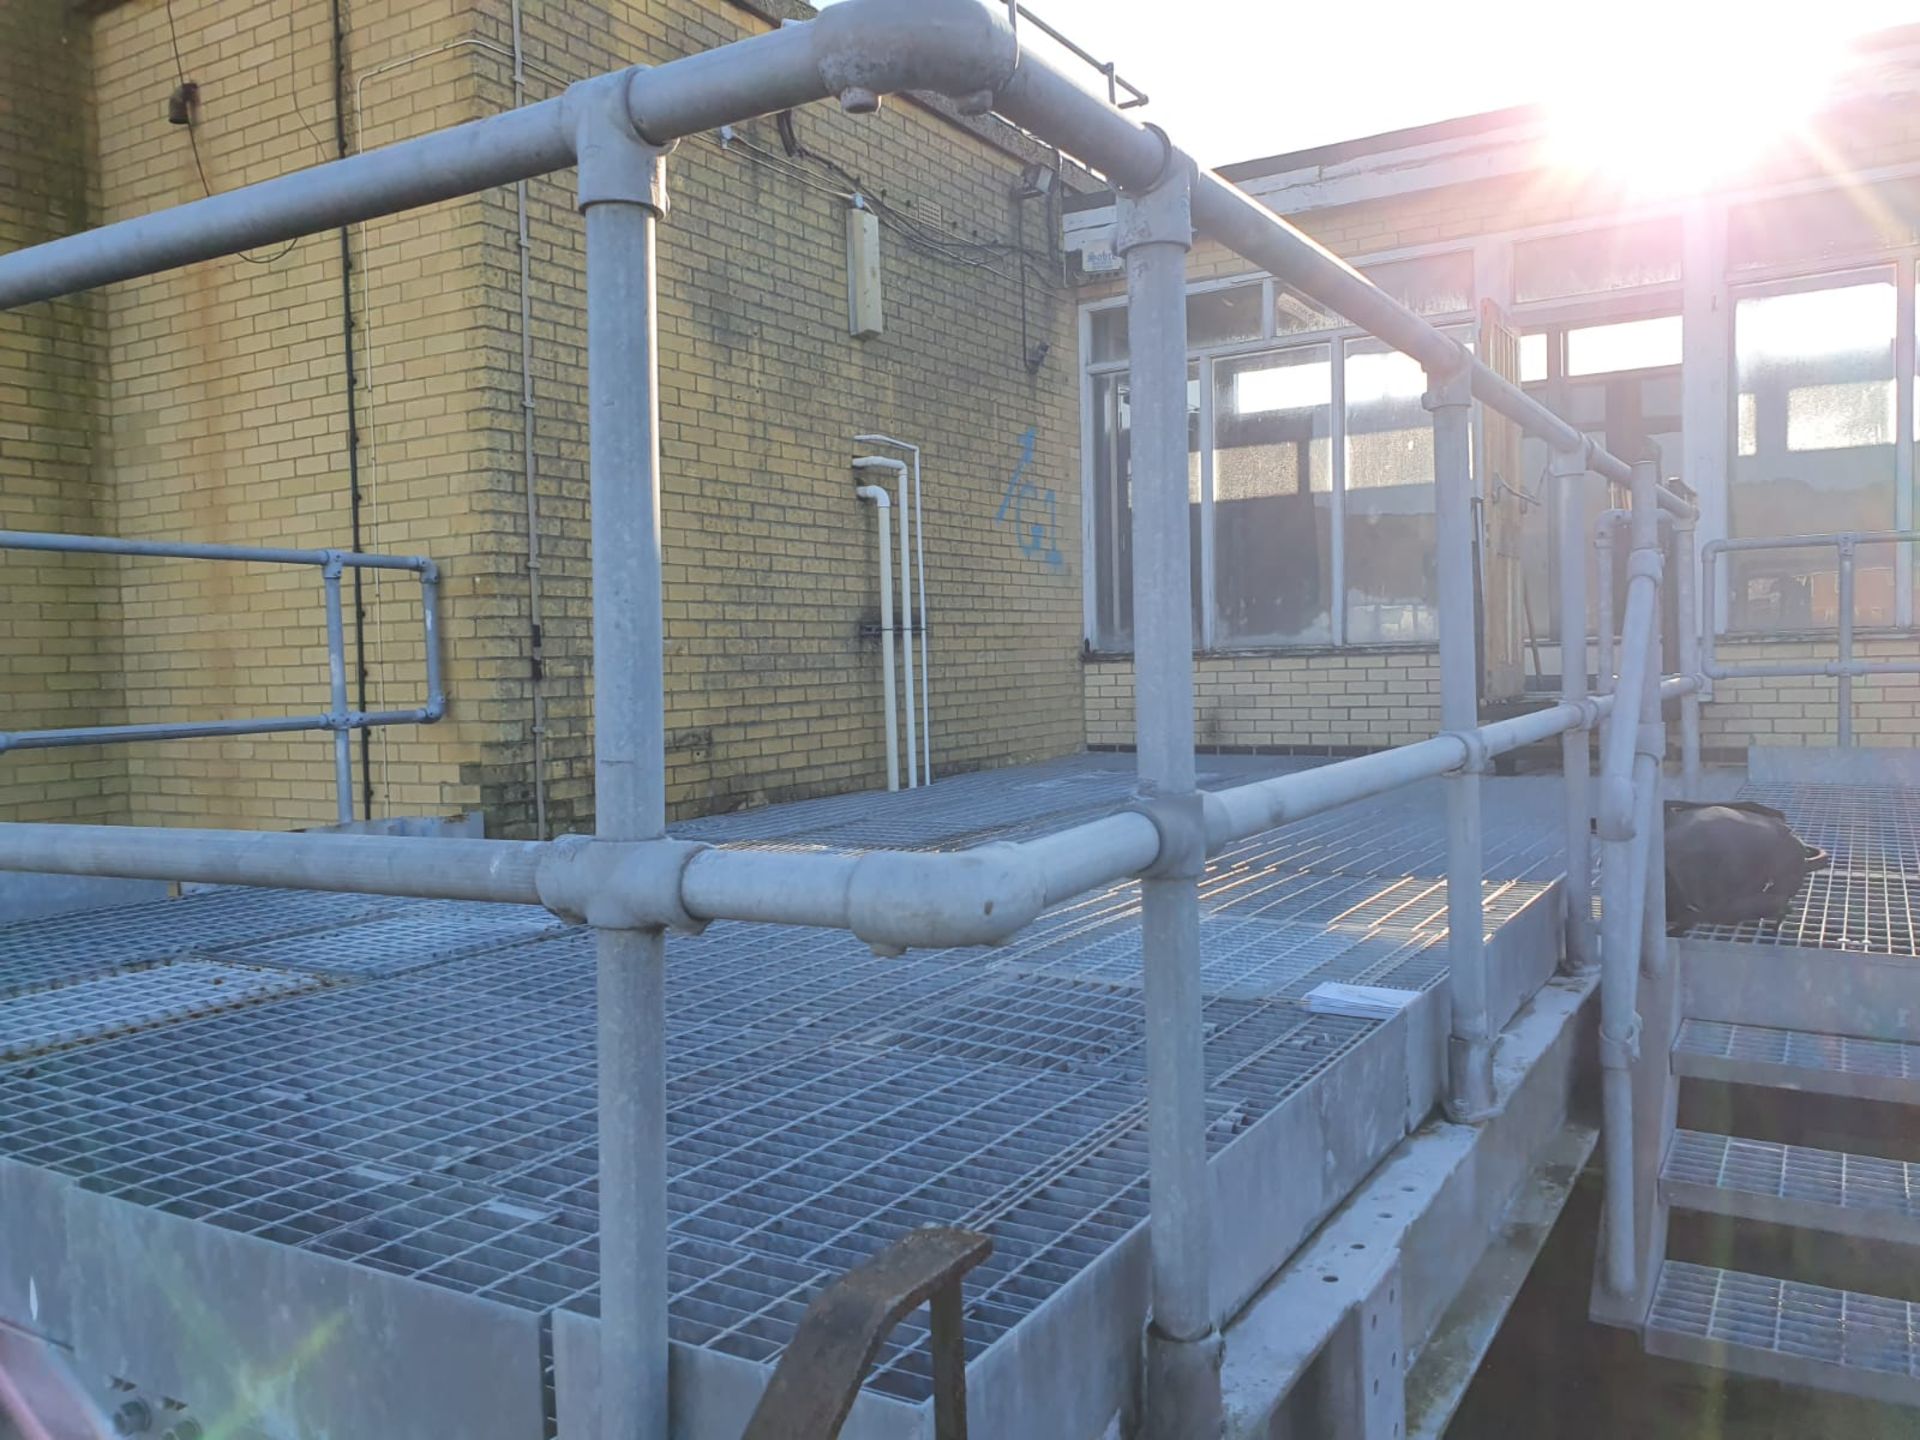 1 x Outdoor Rooftop Mezzanine Floor With Grid Anti Slip Floor Surface and Safety Hand Rails - - Image 8 of 10